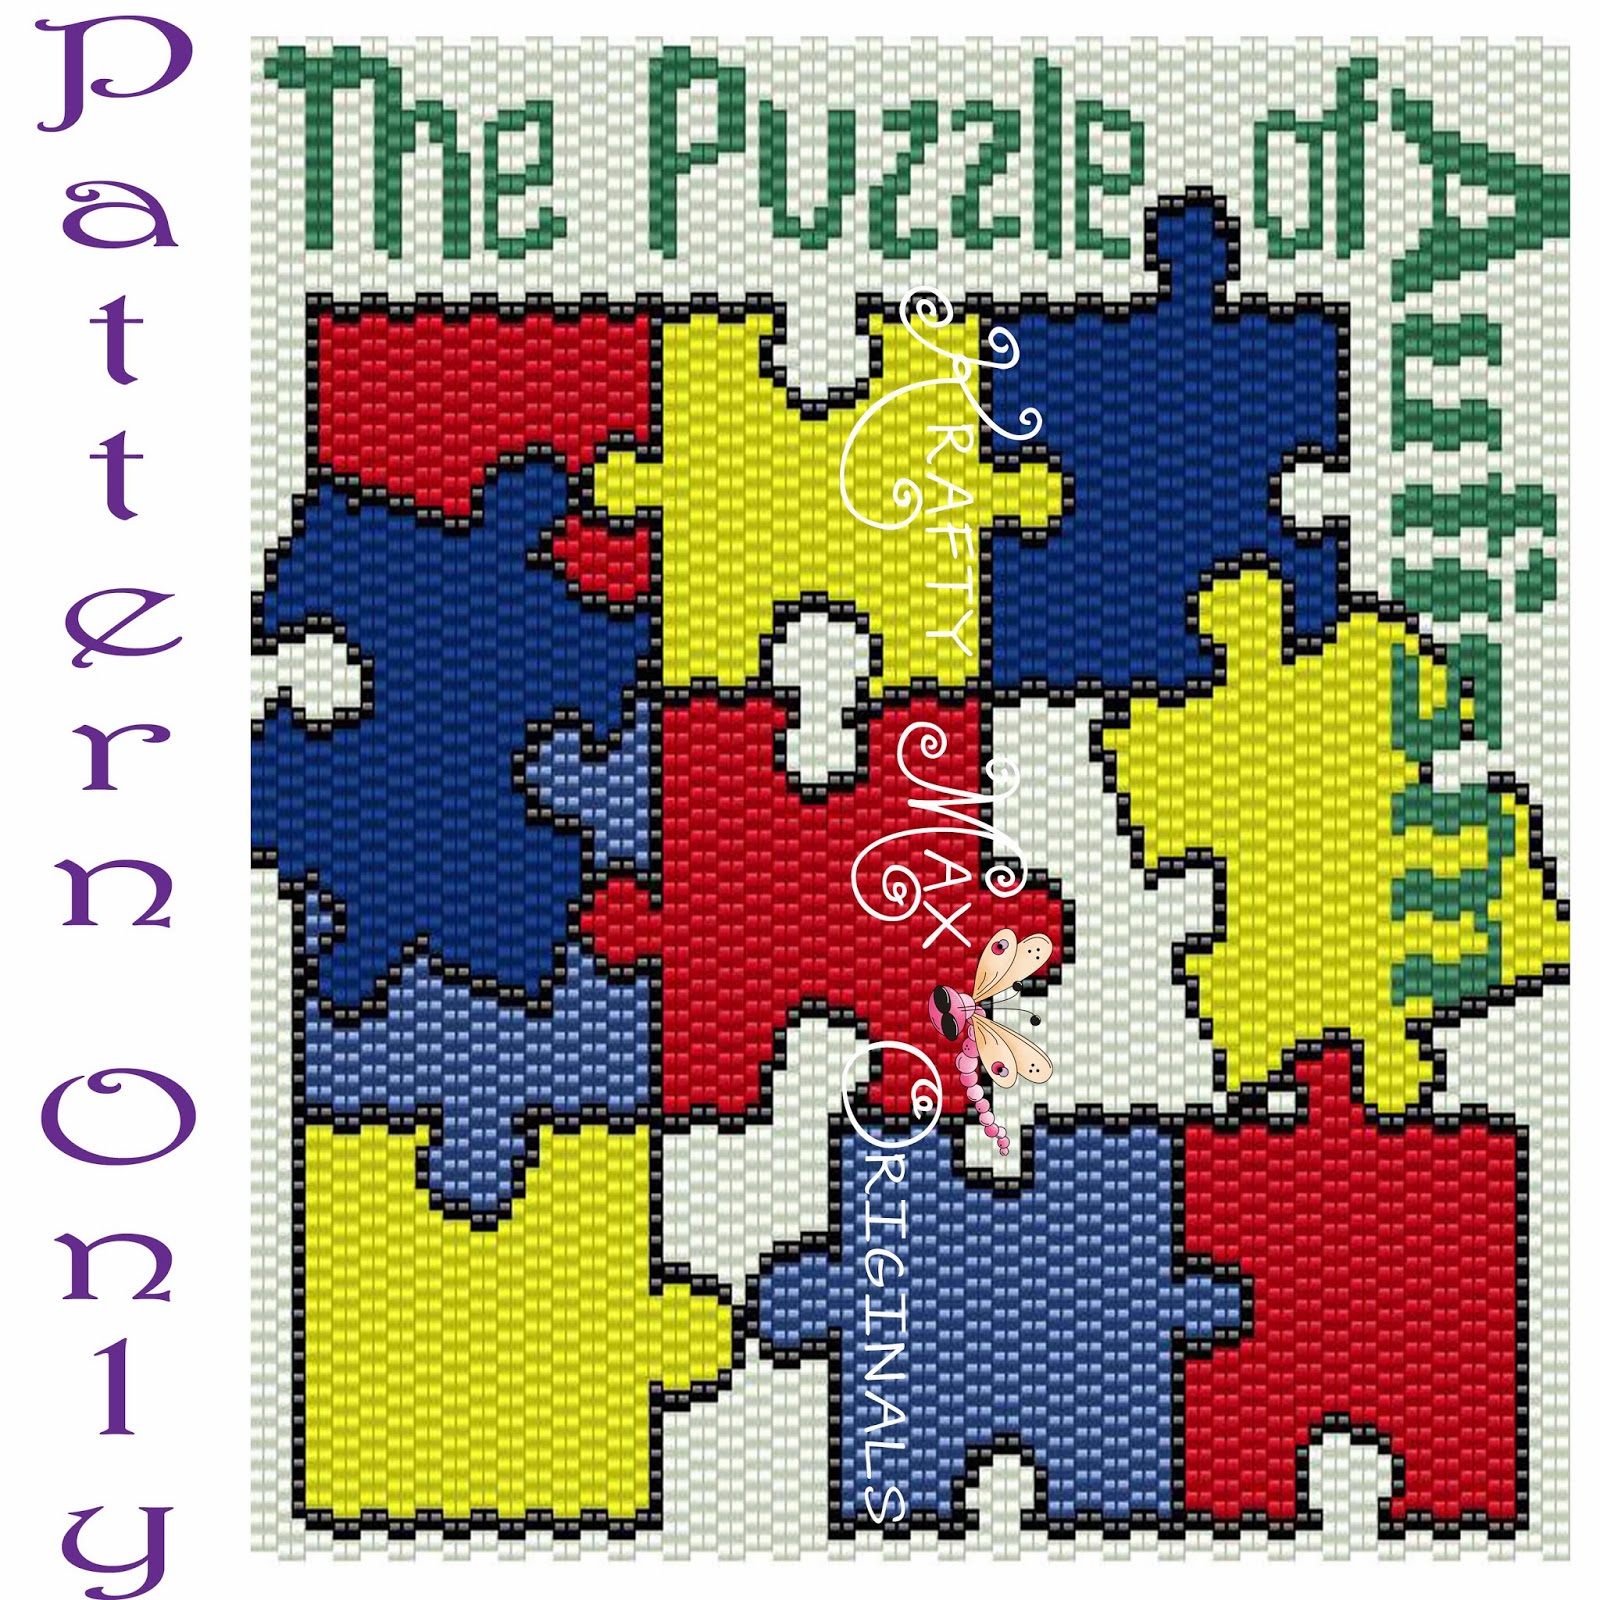 http://www.artfire.com/ext/shop/product_view/KraftyMax/8228831/the_puzzle_of_autism_-_pattern_only_-_krafty_max_original_design/design/patterns/other